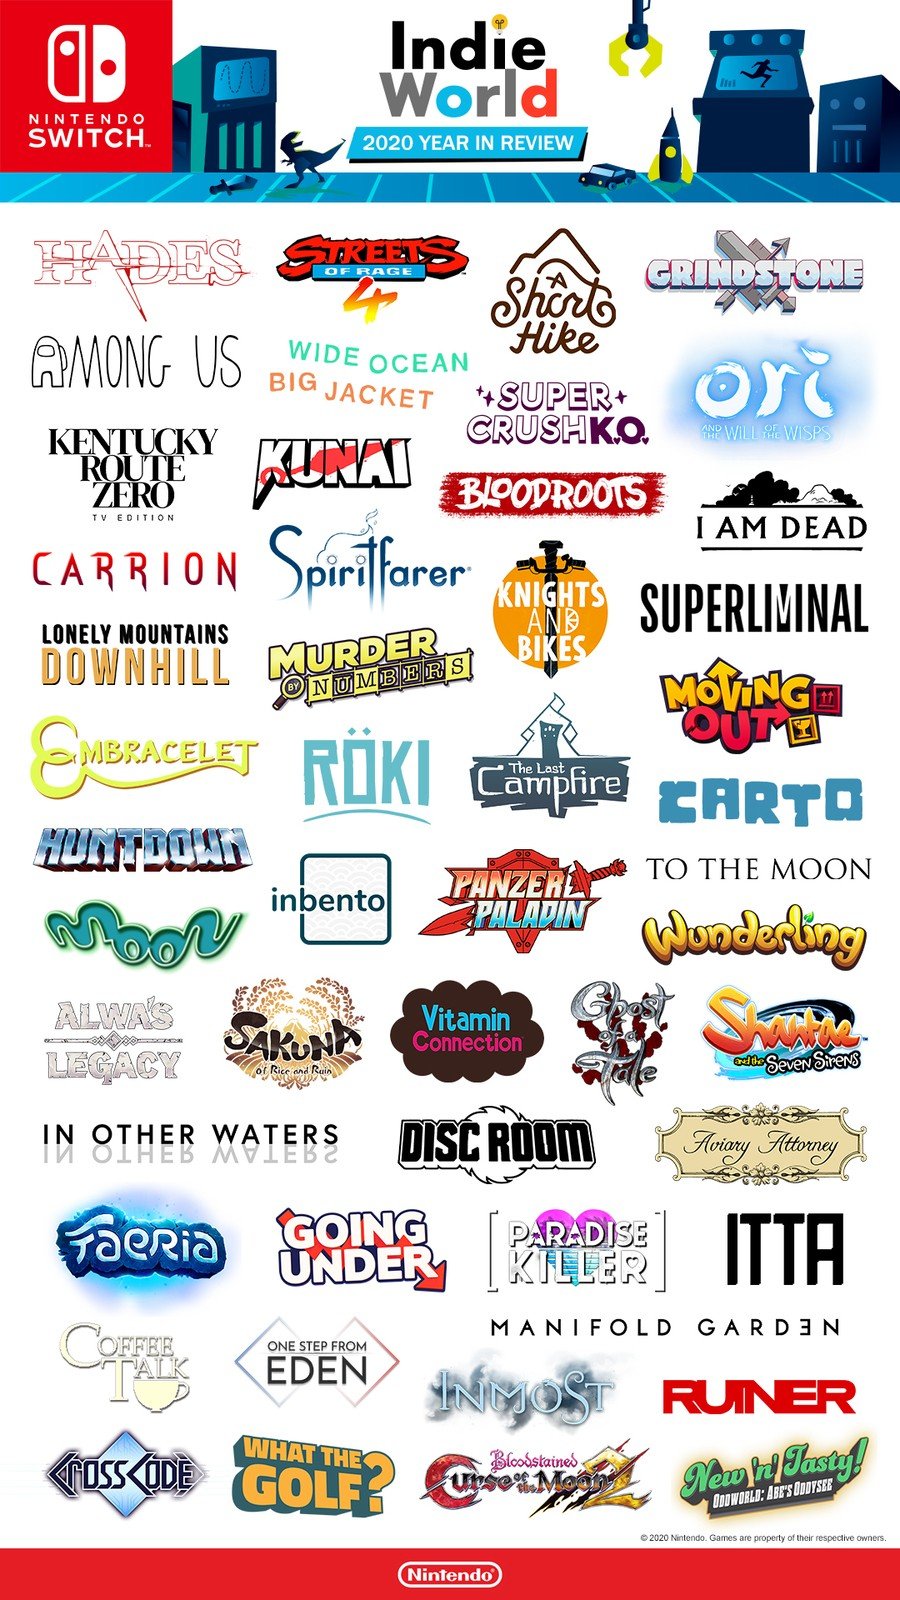 ur Bounce Goodwill Nintendo Shares Colourful Graphic Of The "Great Indie Games" Released On  Switch In 2020 | Nintendo Life